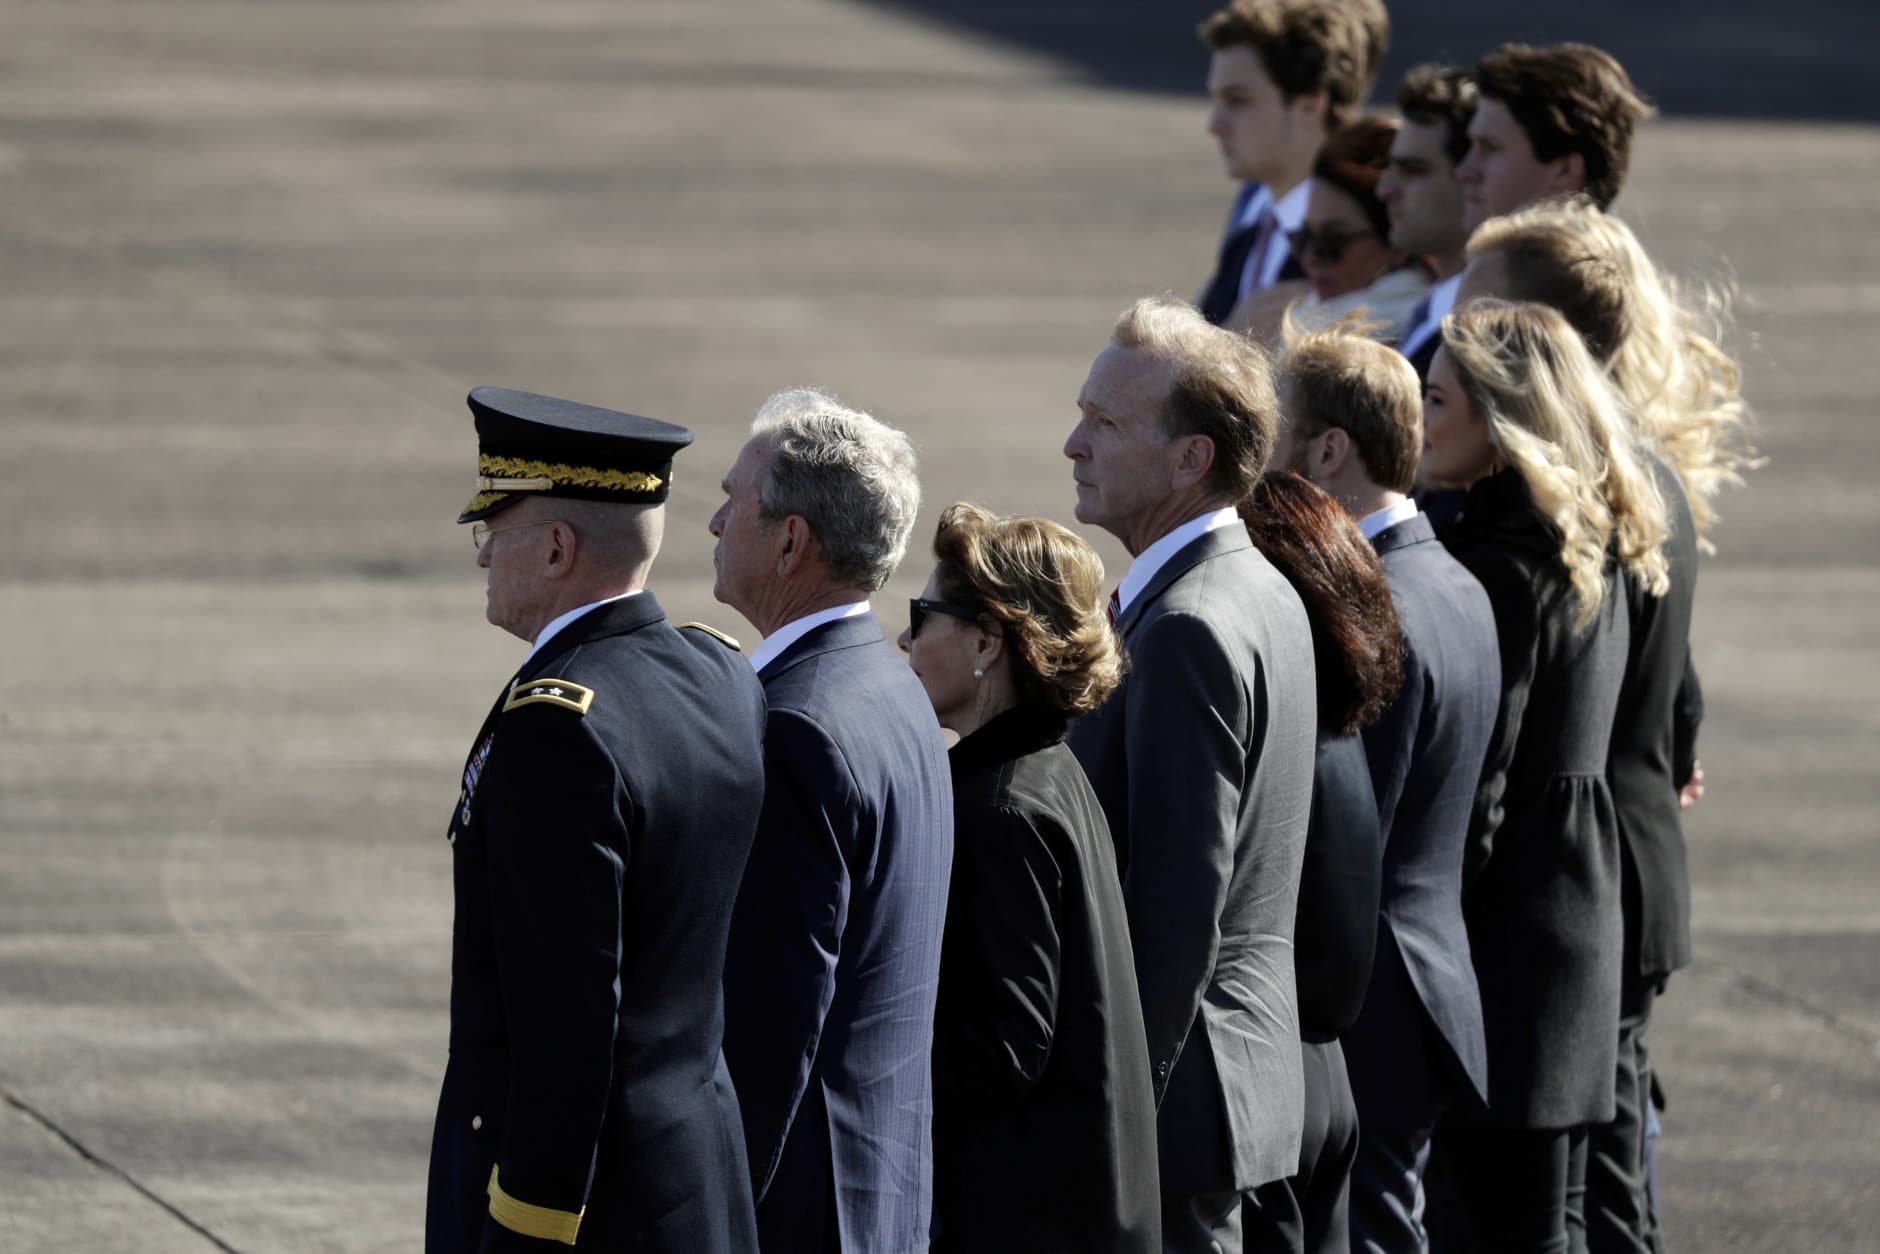 Family members of former President George H.W. Bush, including former President George W. Bush, second from left, watch as members of the military carry the casket to Special Air Mission 41at Ellington Field during a departure ceremony for a state funeral, Monday, Dec. 3, 2018, in Houston. (AP Photo/Eric Gay)